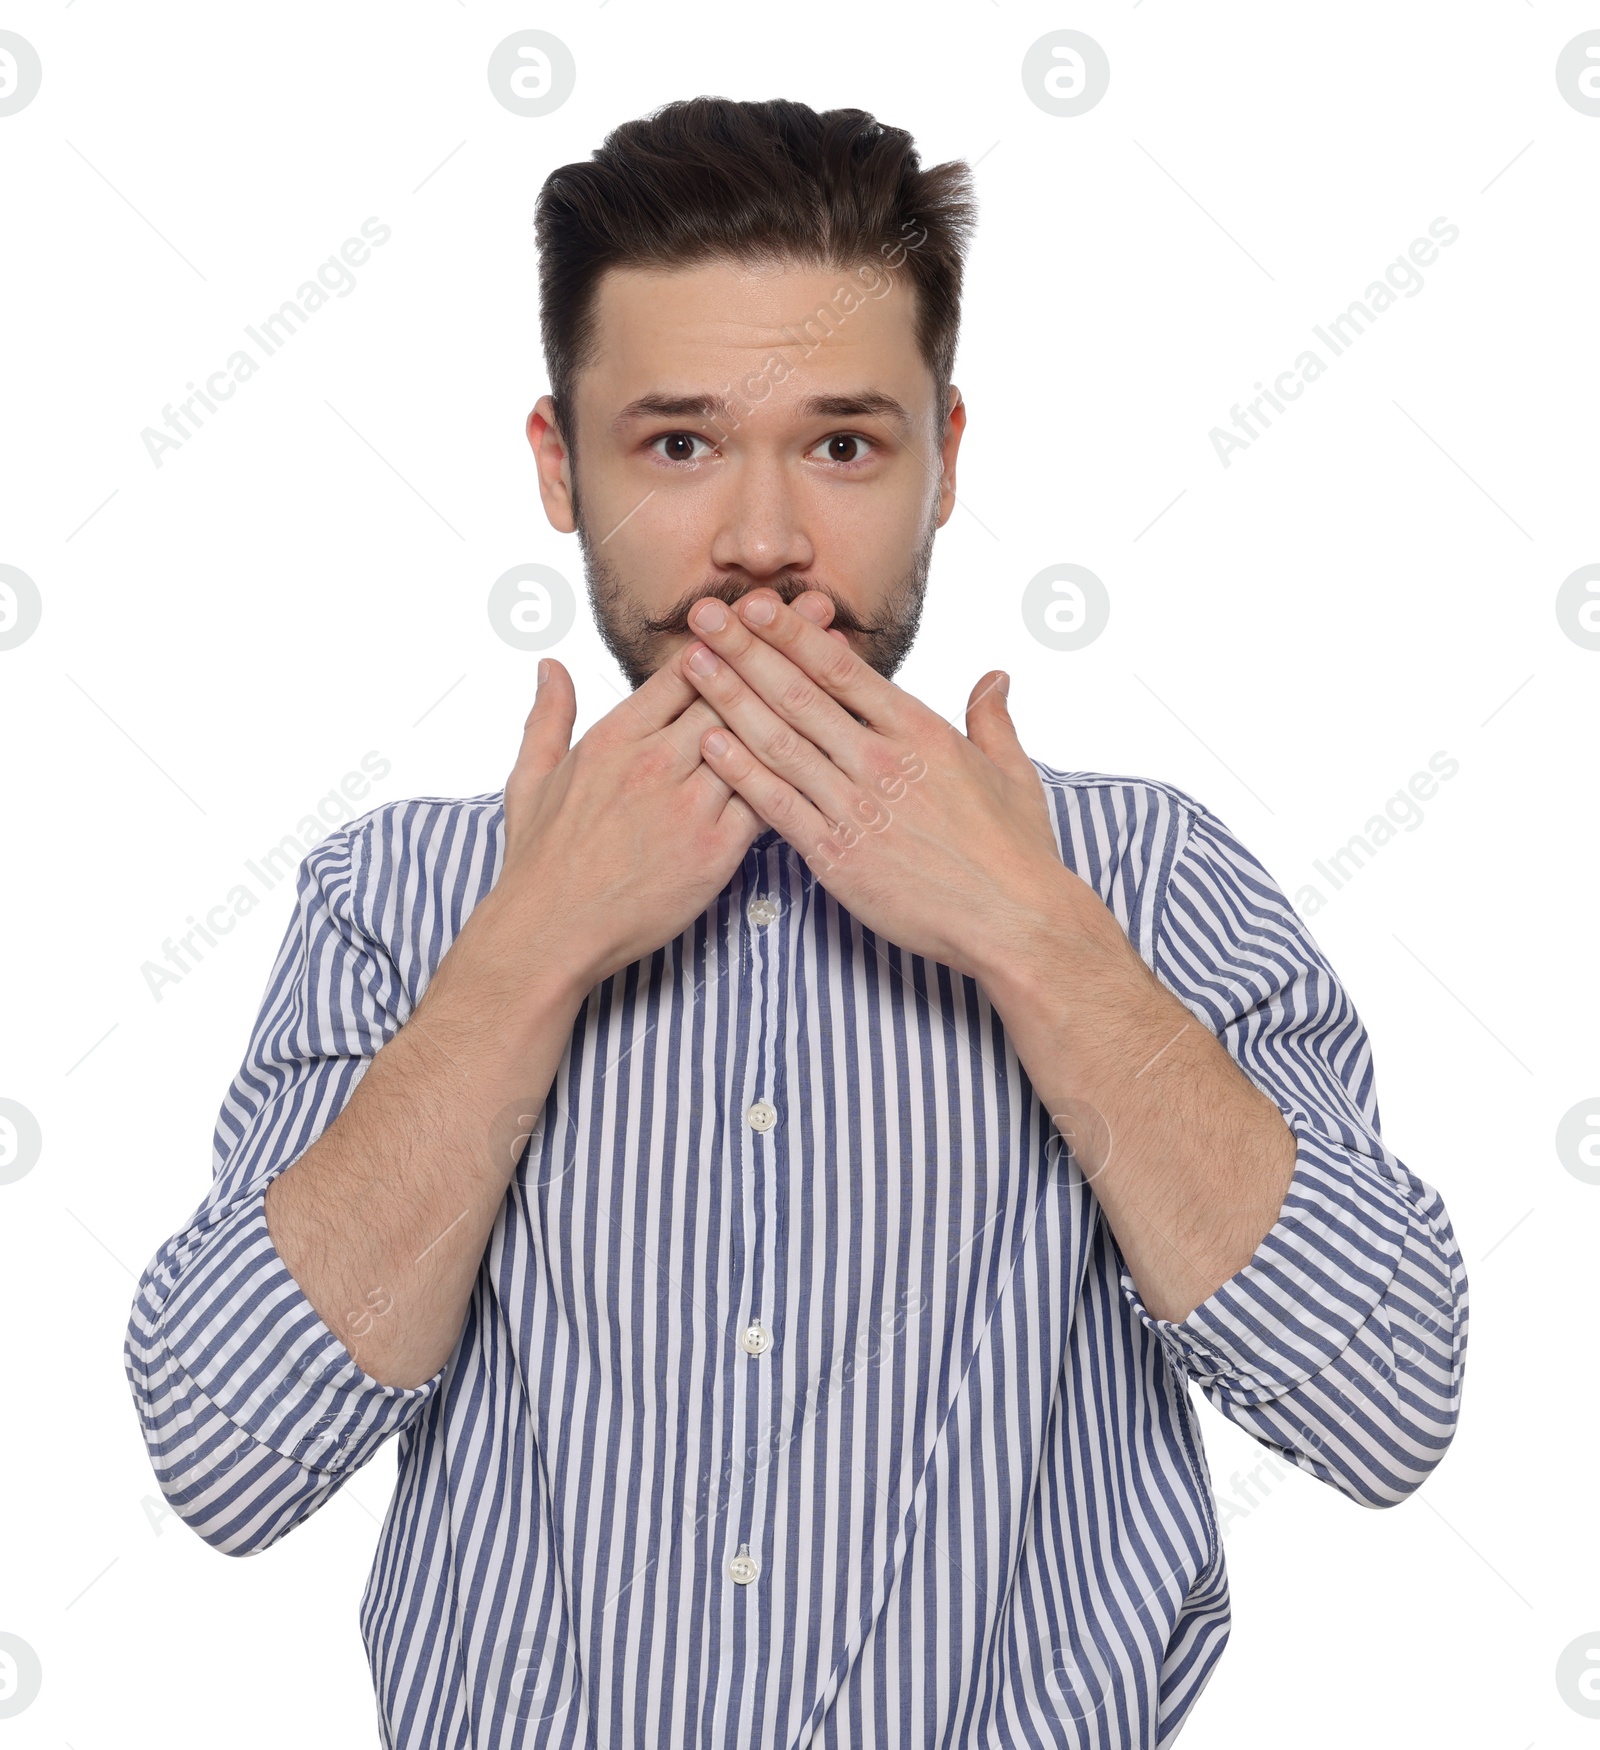 Photo of Embarrassed man covering mouth with hands on white background